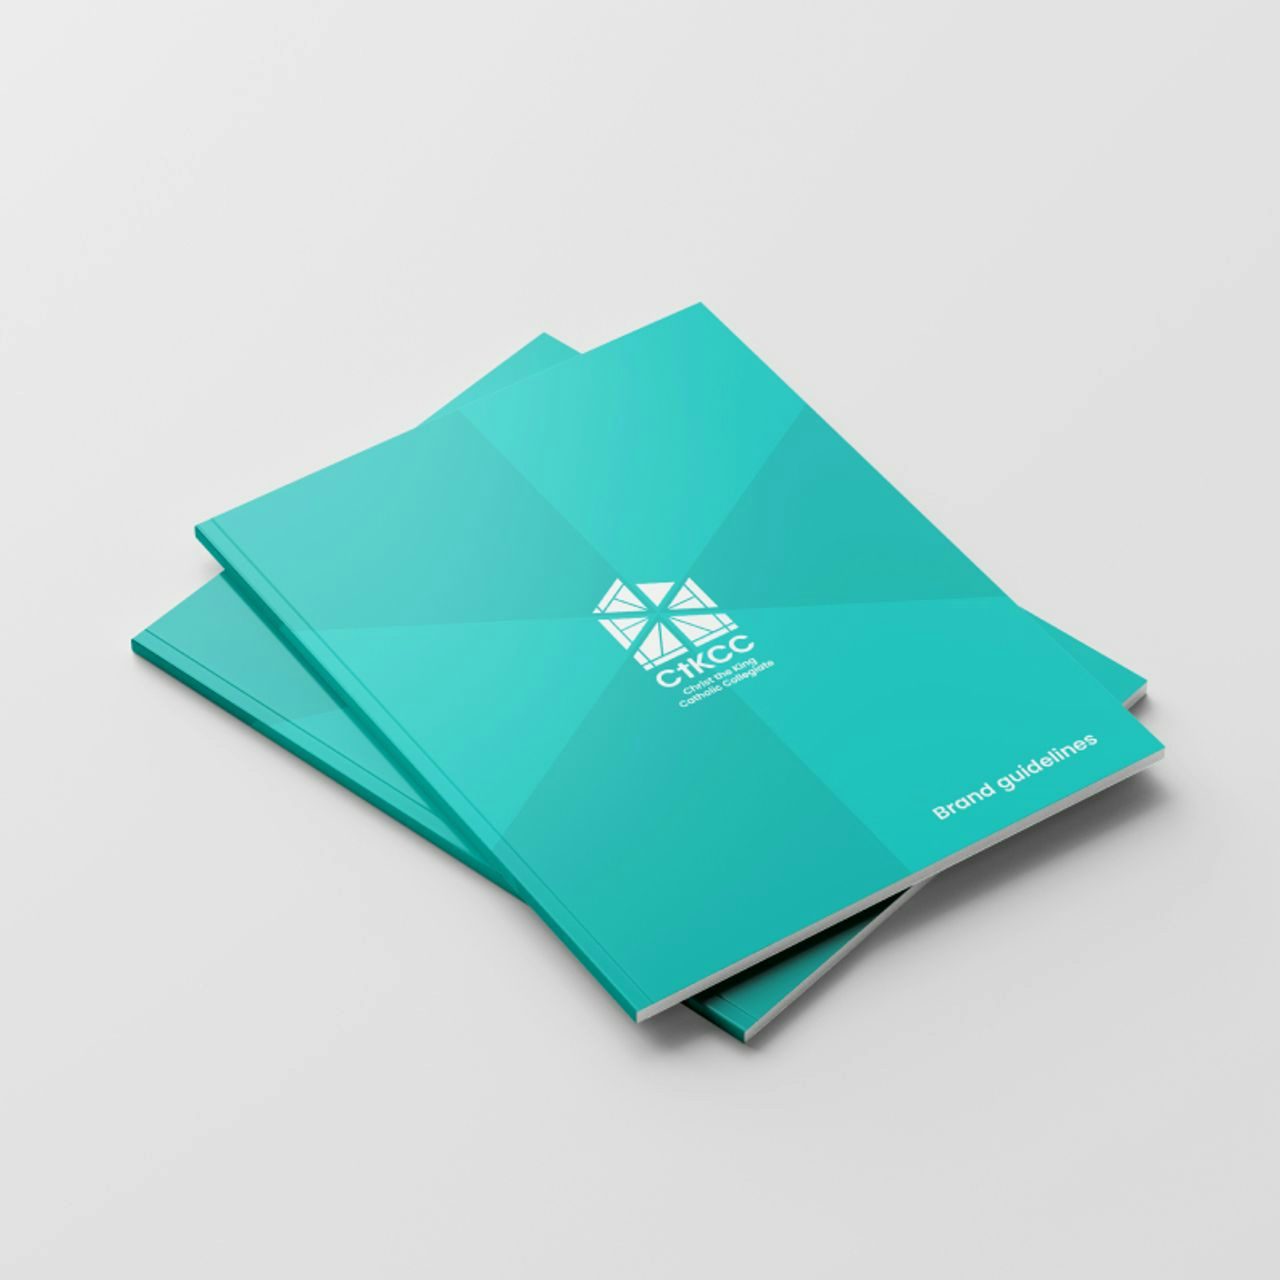 Two teal perfect-bound brochures with 'CtKCC Brand Guidelines' on the cover, set against a white background, showcasing corporate branding materials.